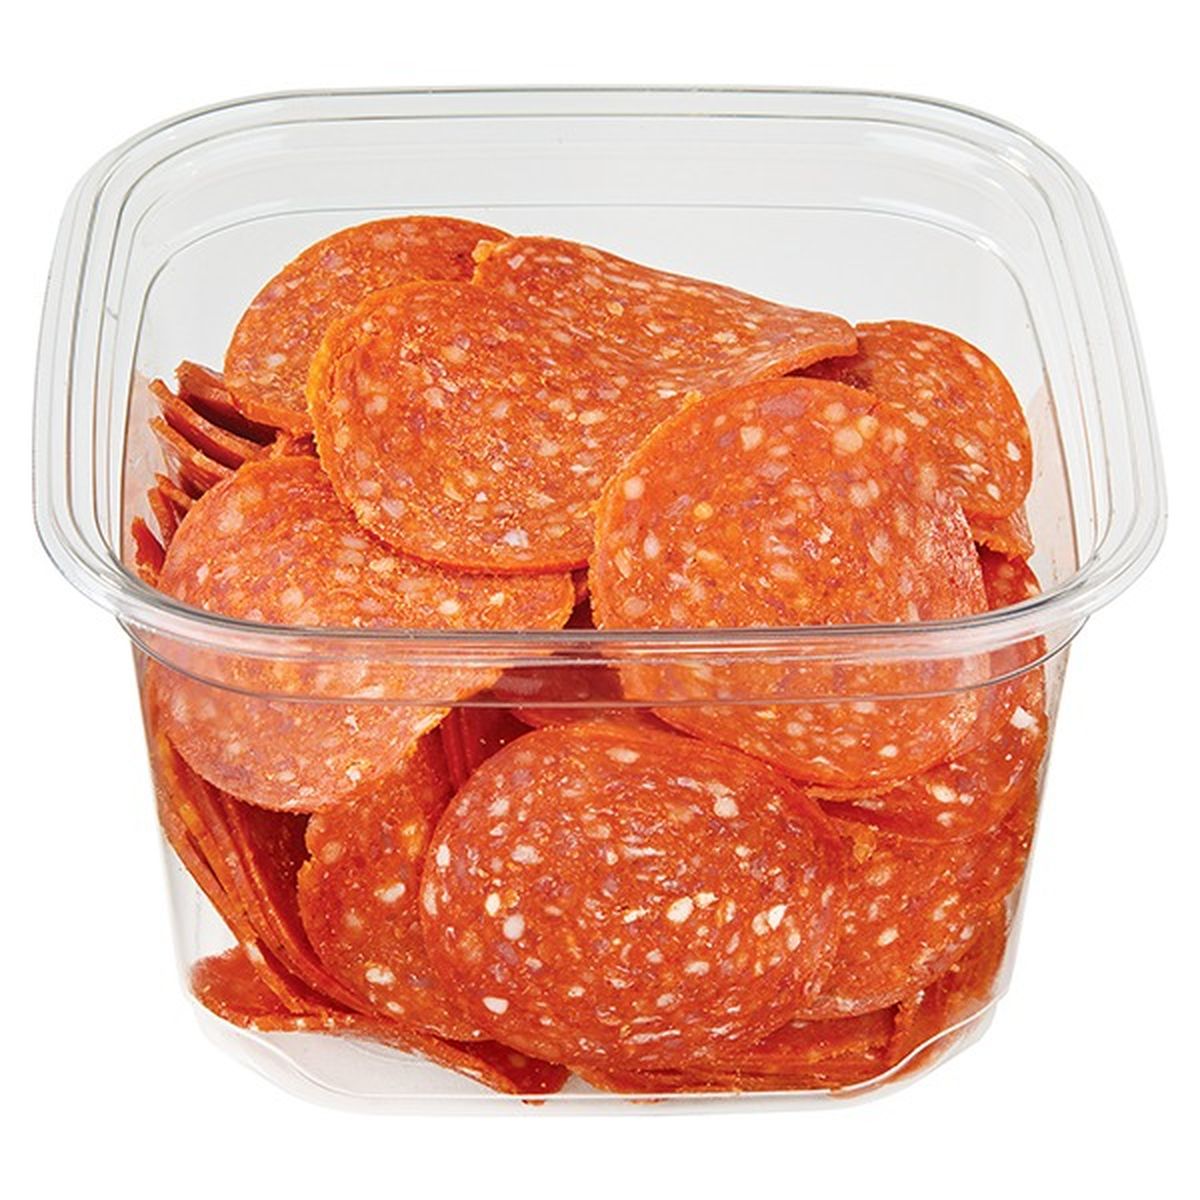 Calories in Wegmans Sliced Pepperoni, Pizza Topping